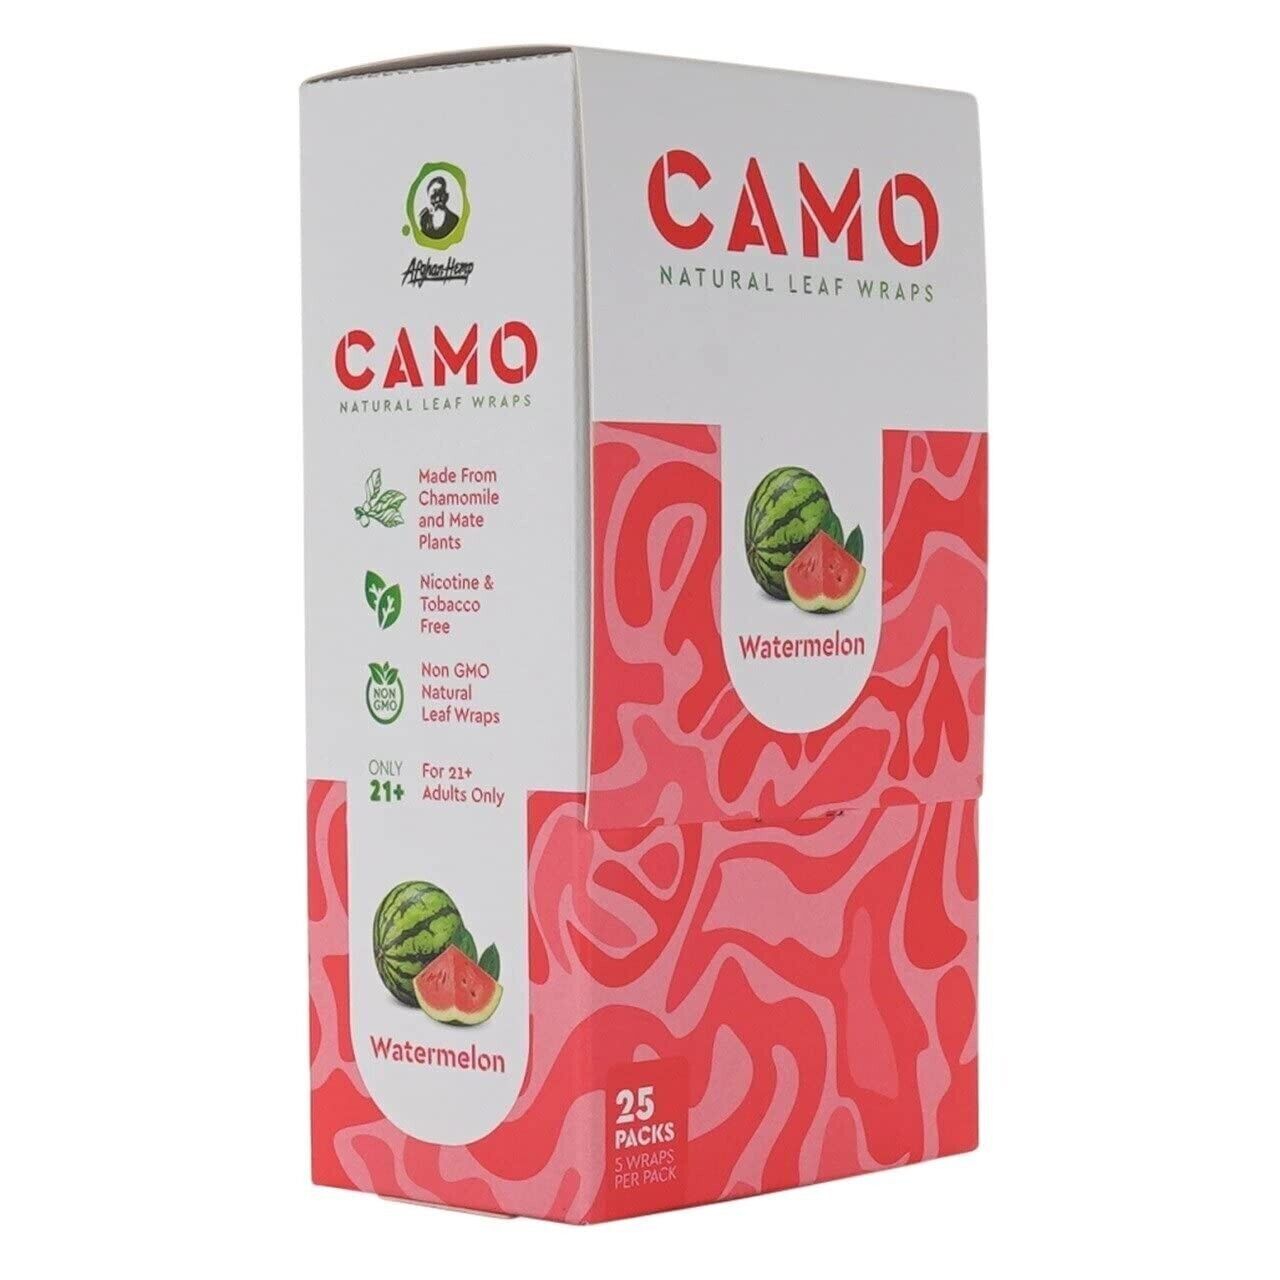 CAMO Natural Leaf Wraps -  WATERMELON - Full box 25 Packs of 5